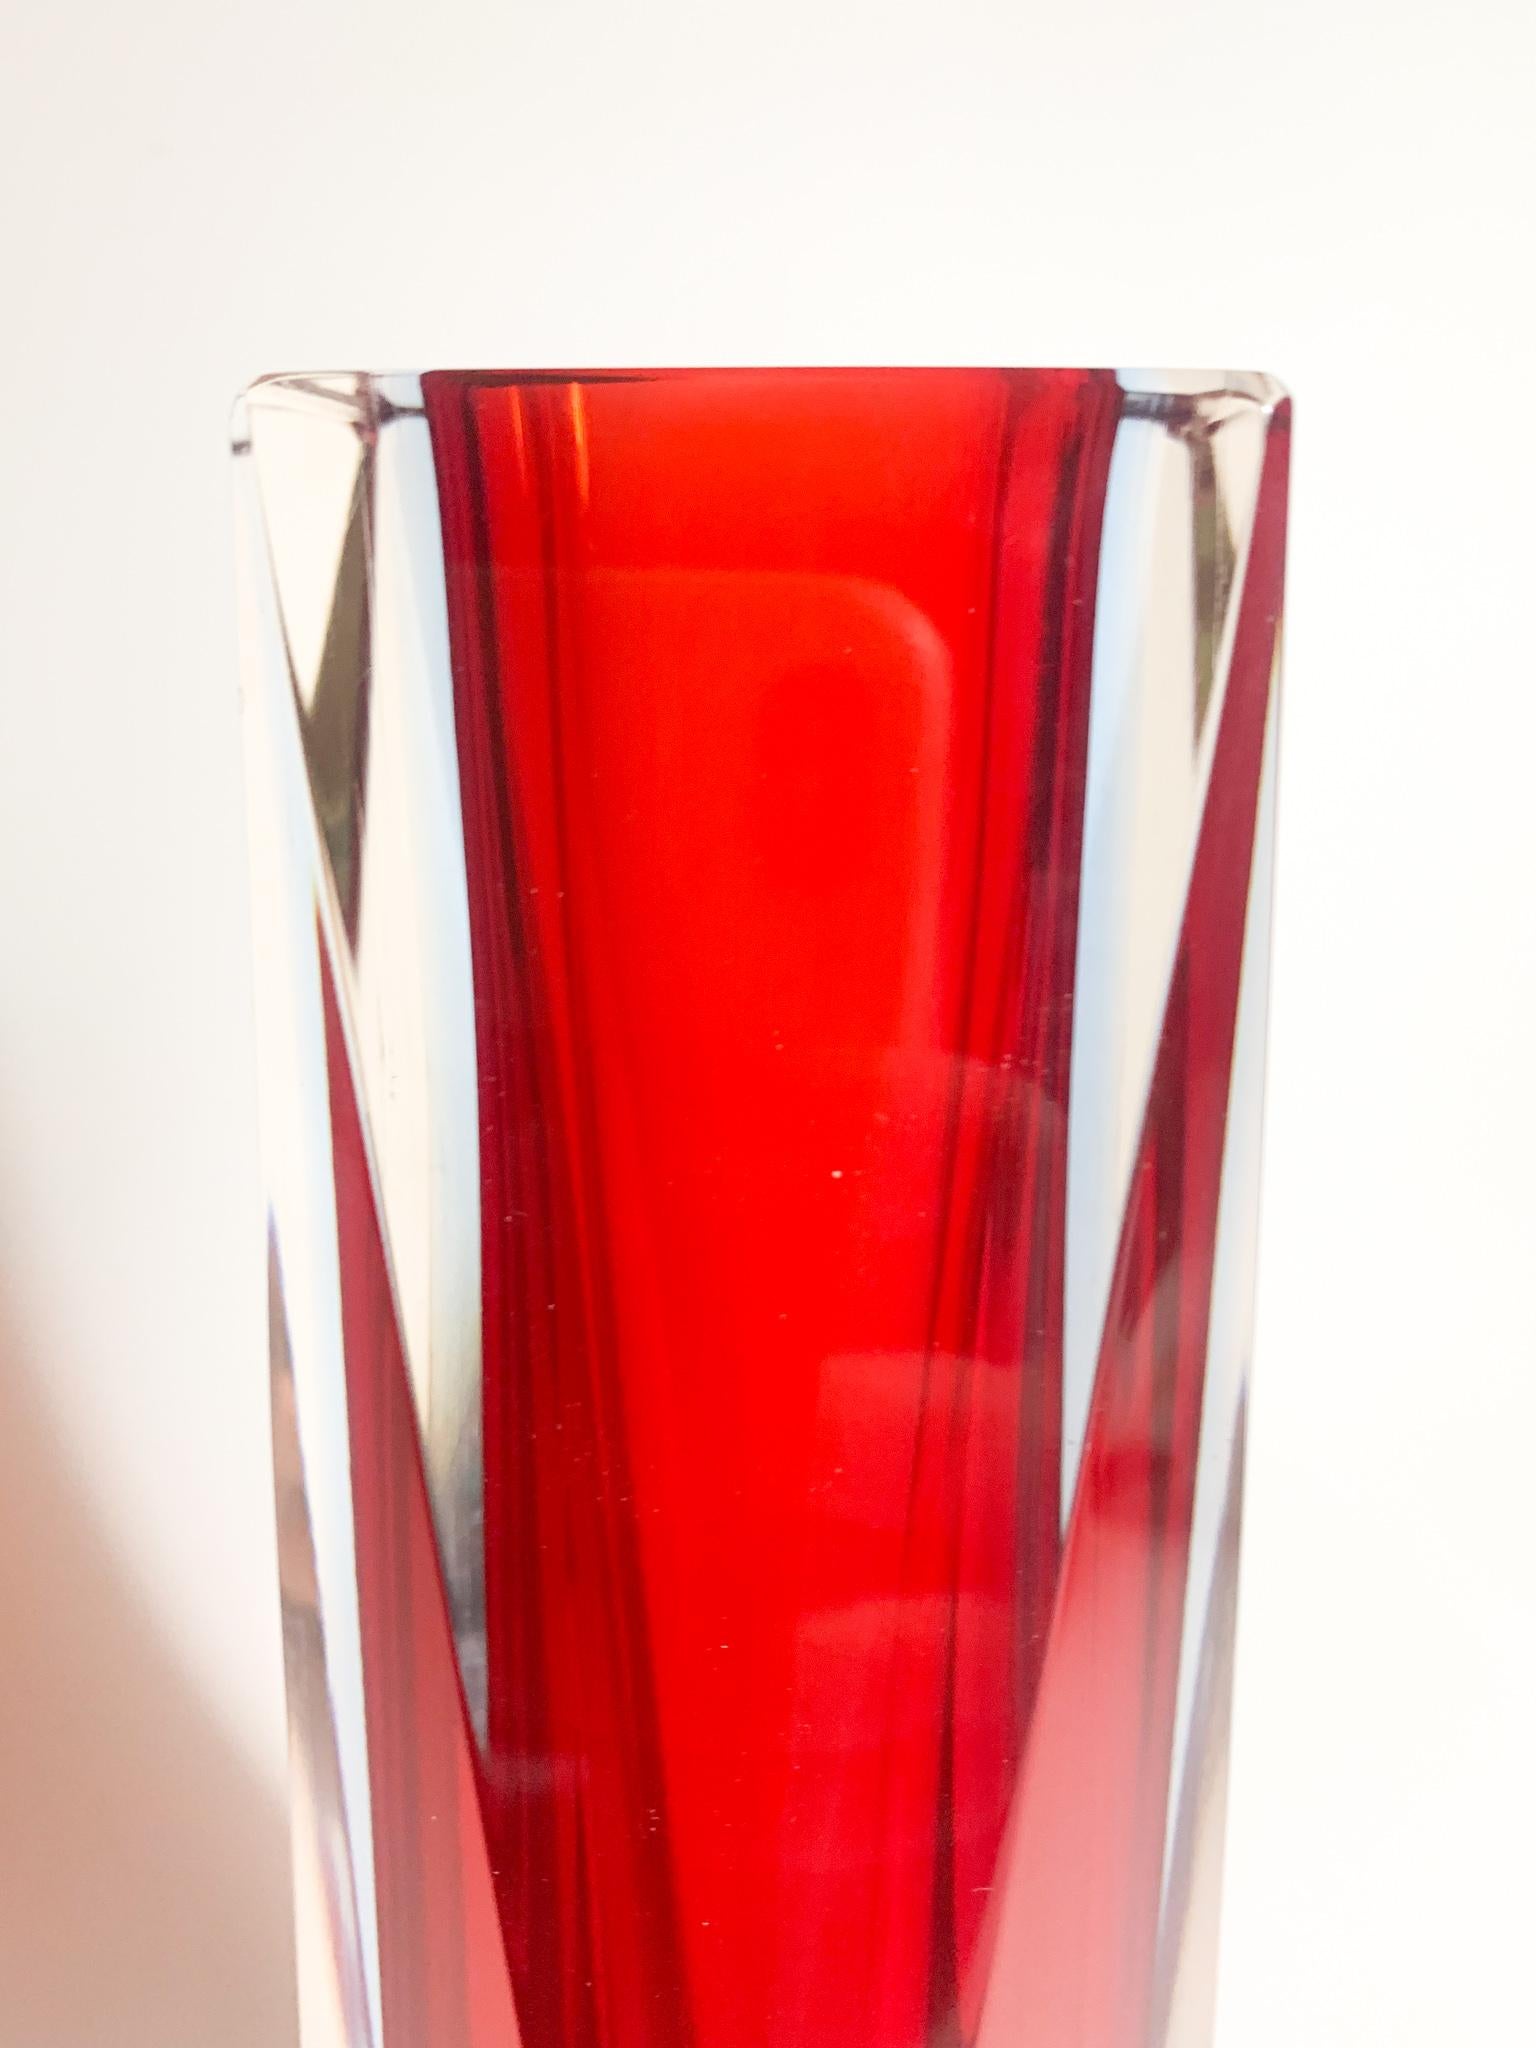 Italy Geometric Vase in Red & Blue Murano Glass Attributed to Flavio Poli 1970s For Sale 3